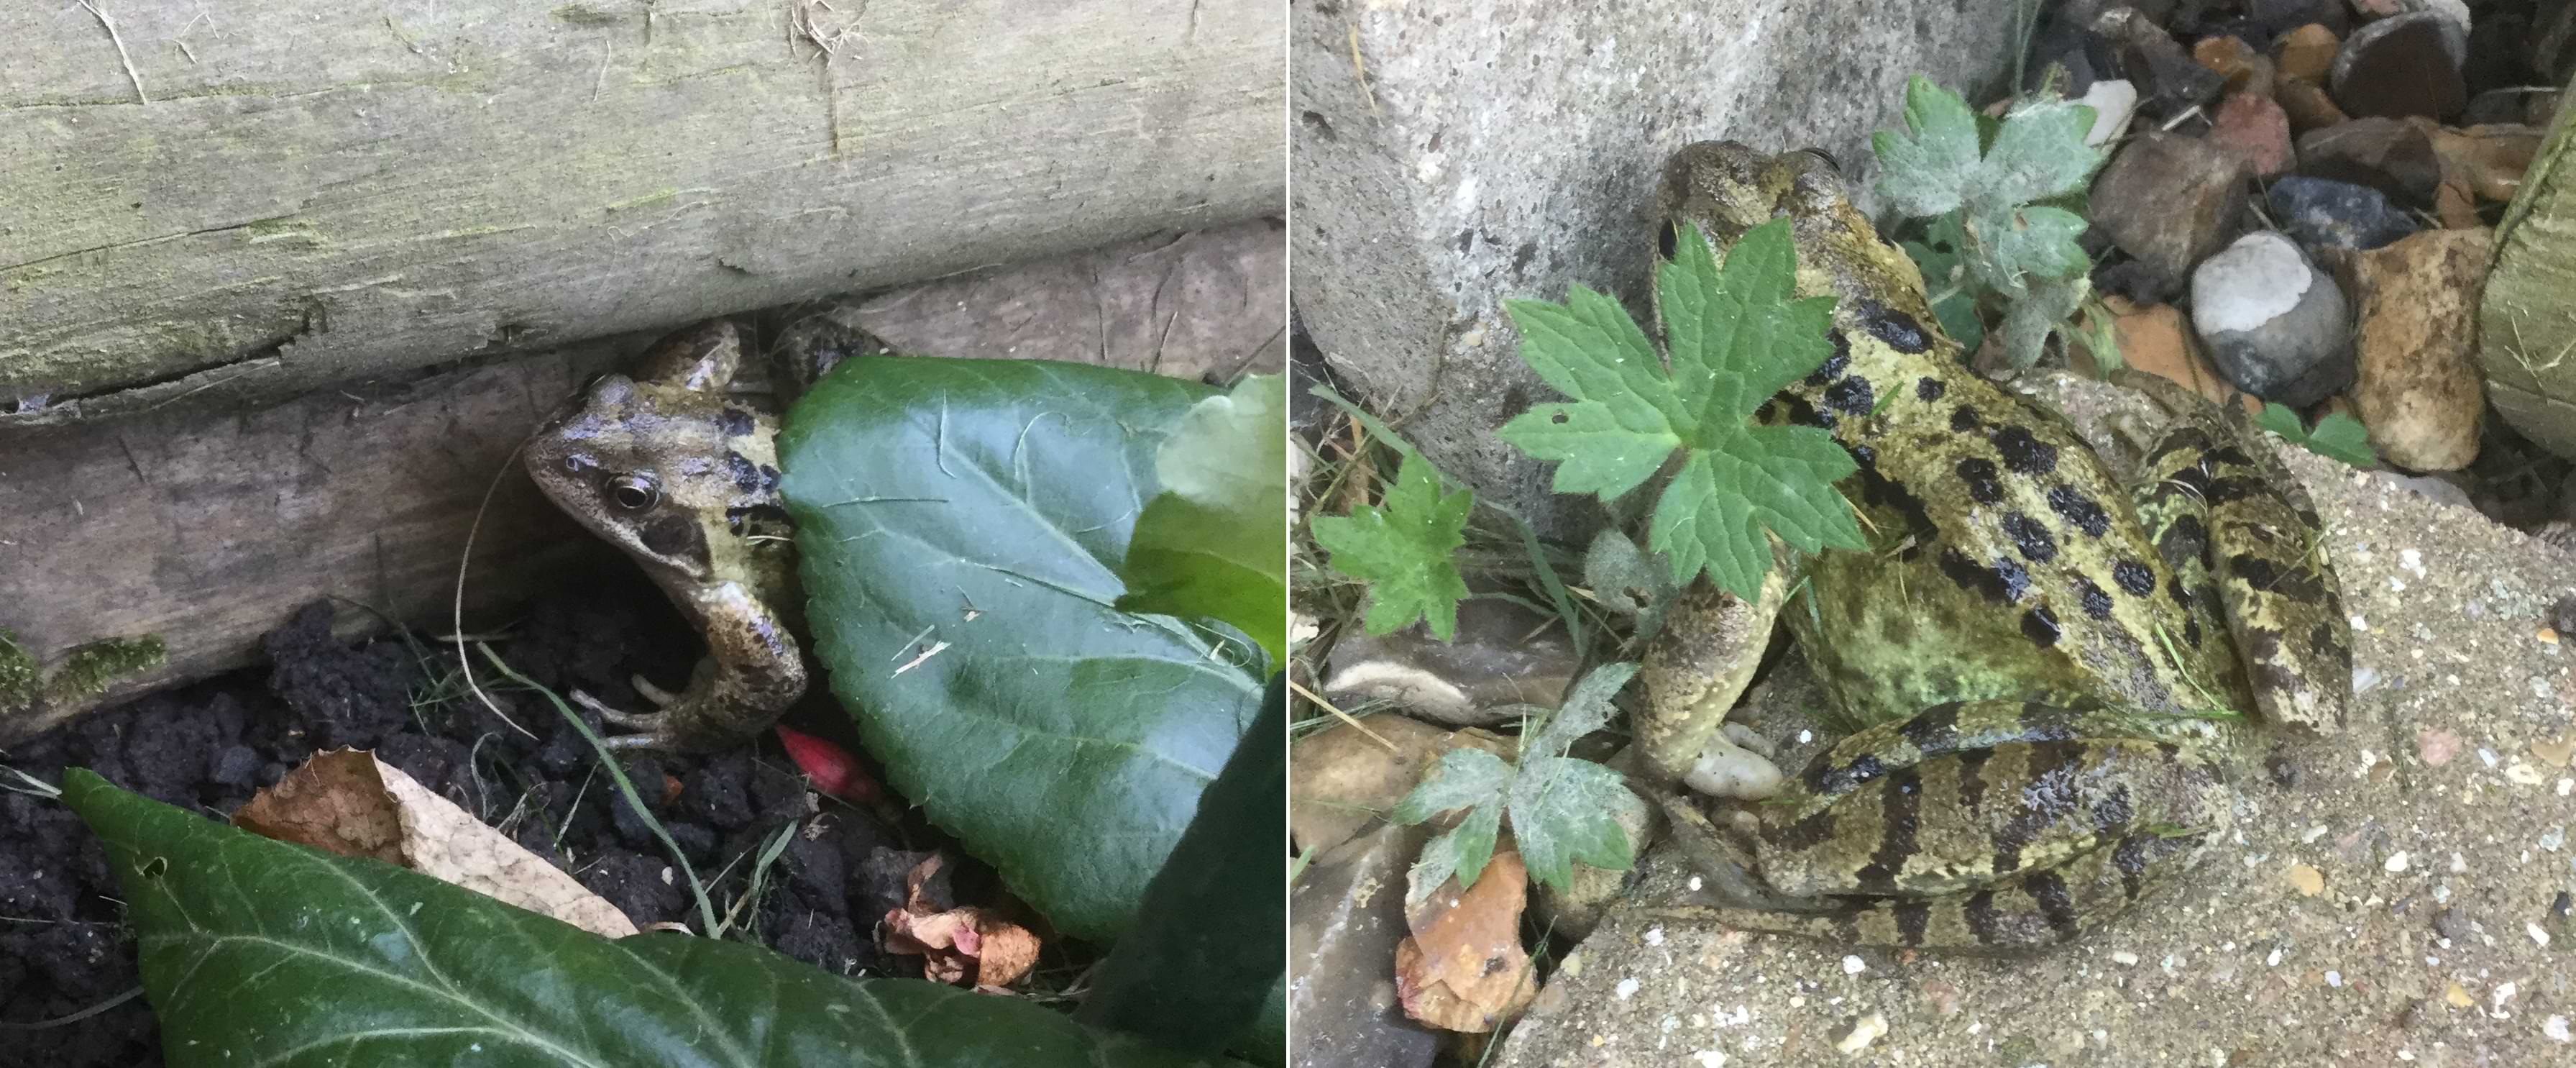 Two photos of a green and brown frog hiding under leaves. This frog has complex markings, with stripes running down their legs and dark splodges running up their back.